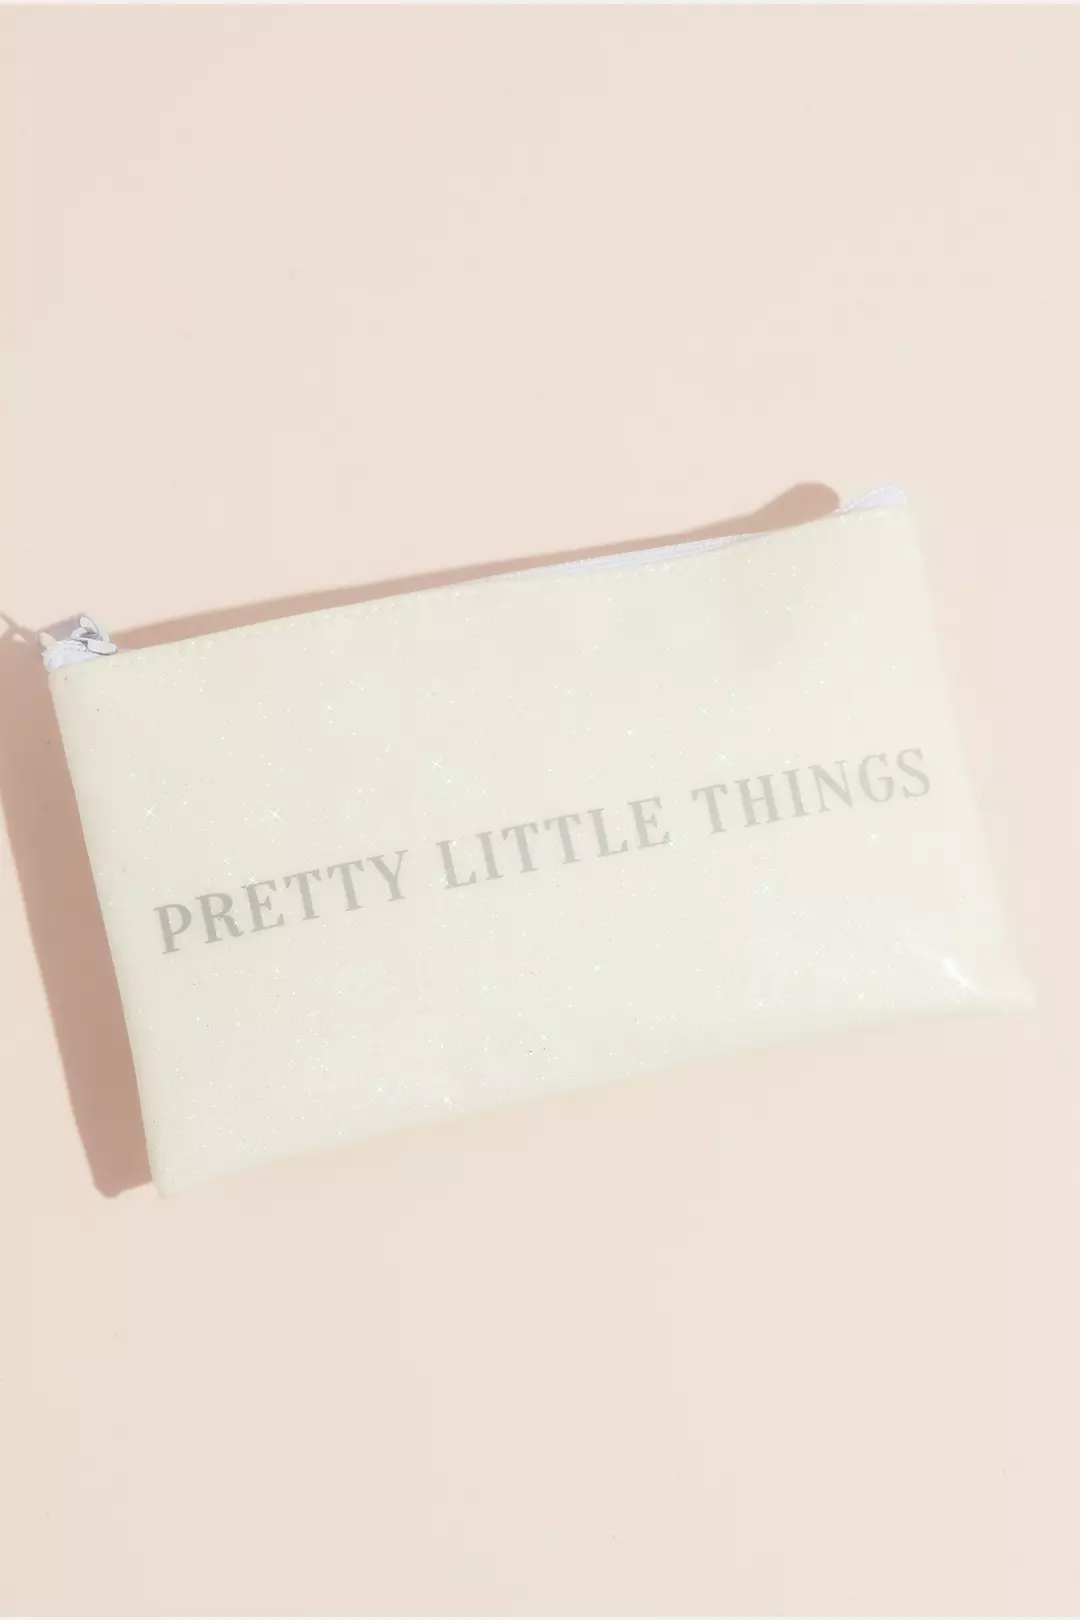 Pretty Little Things Sparkly Cosmetic Bag Image